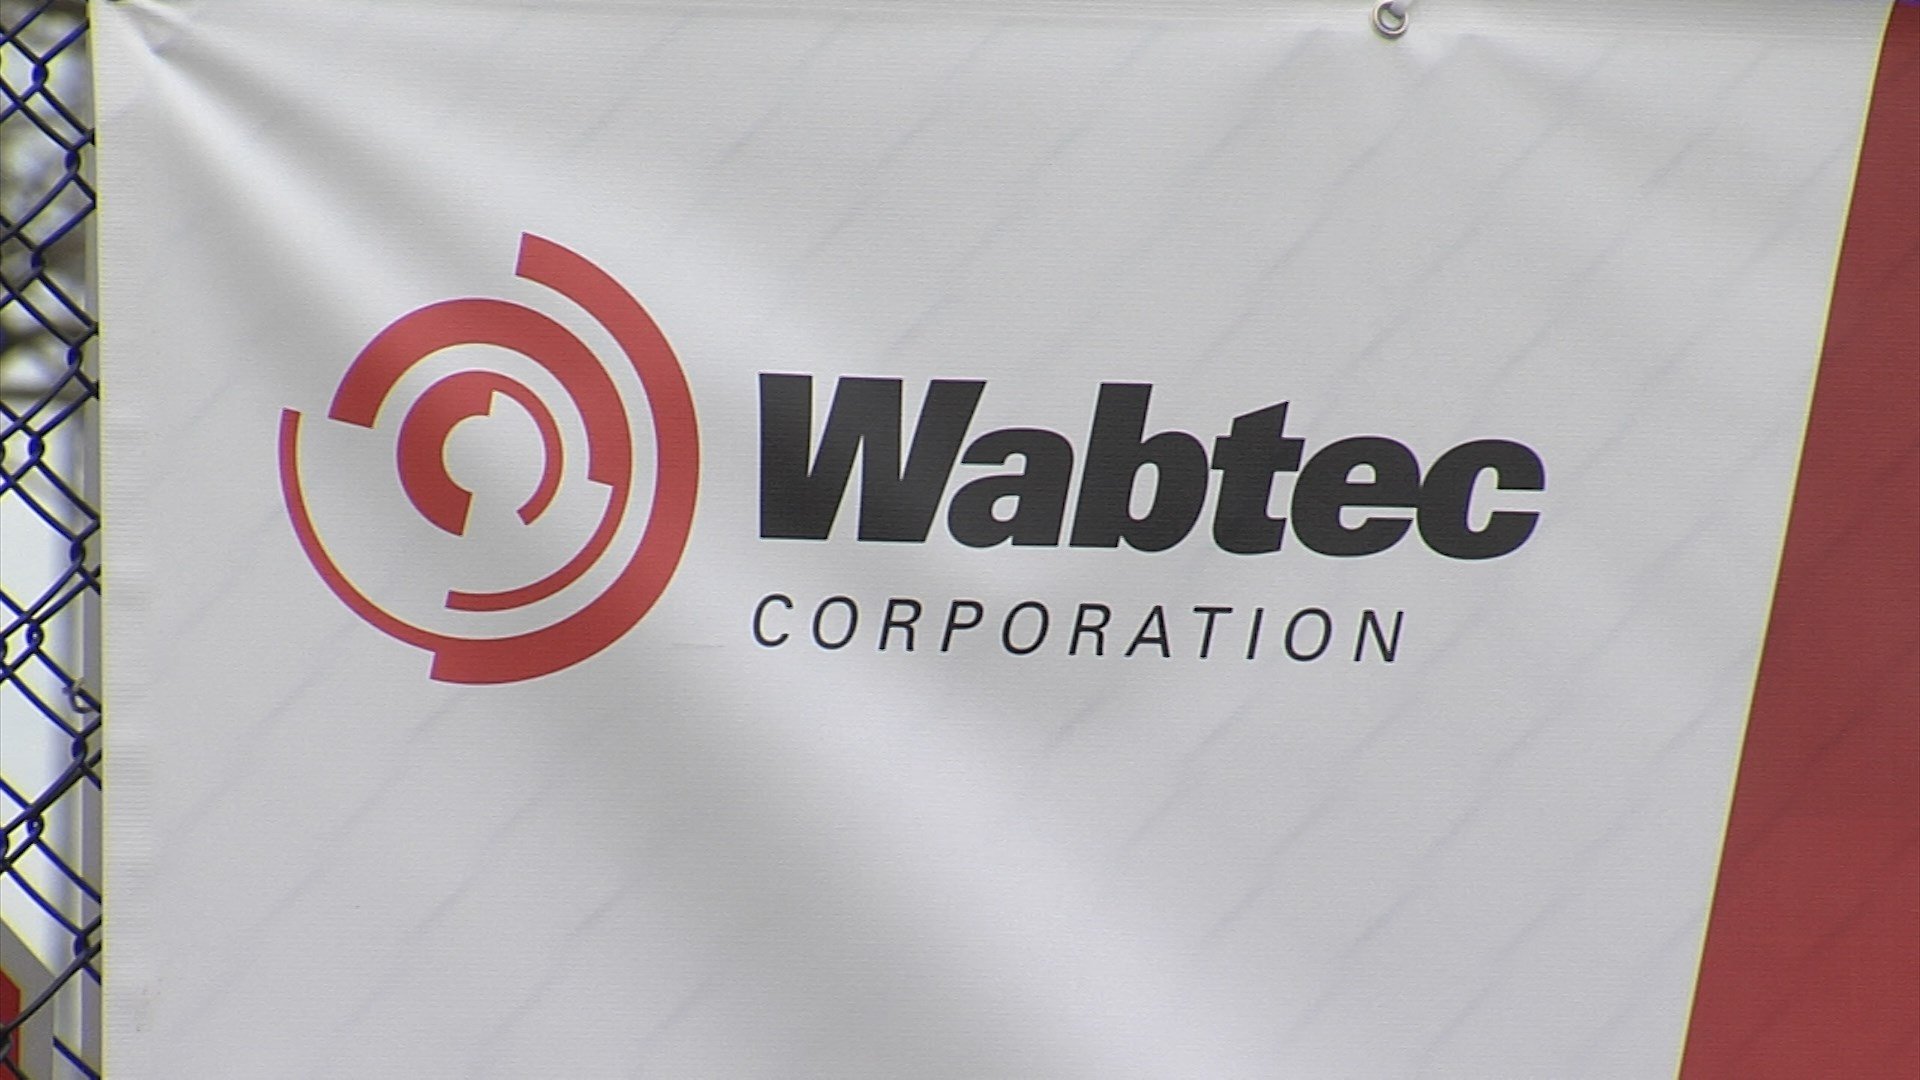 Wabtec Corporation to Close Allegheny County Facility, 94 Employees to be Laid Off